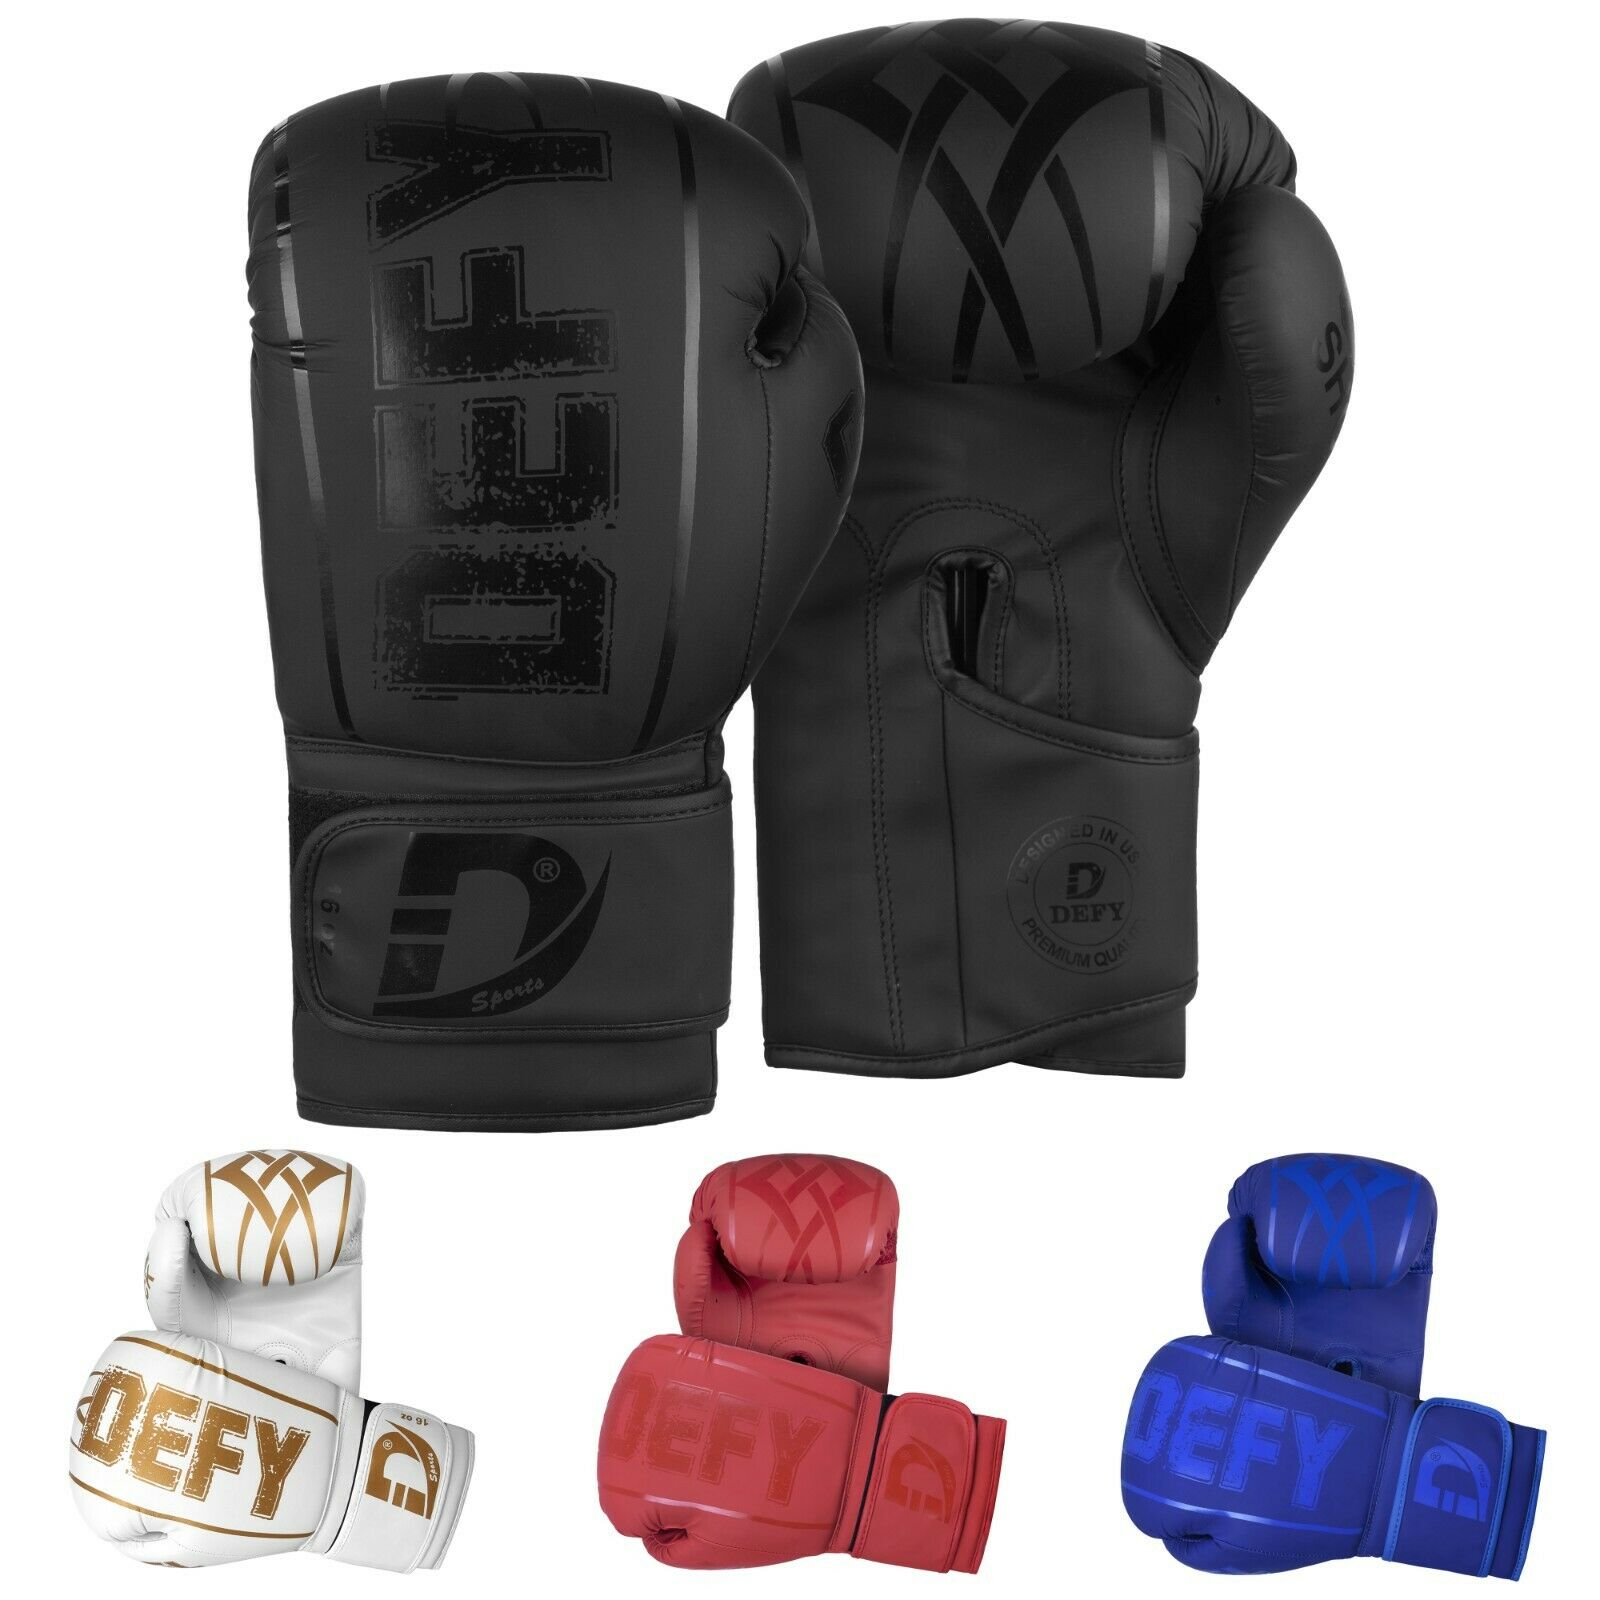 DEFY® Synthetic Leather Boxing Glove Thai Training Punching Bag Sparring Gloves